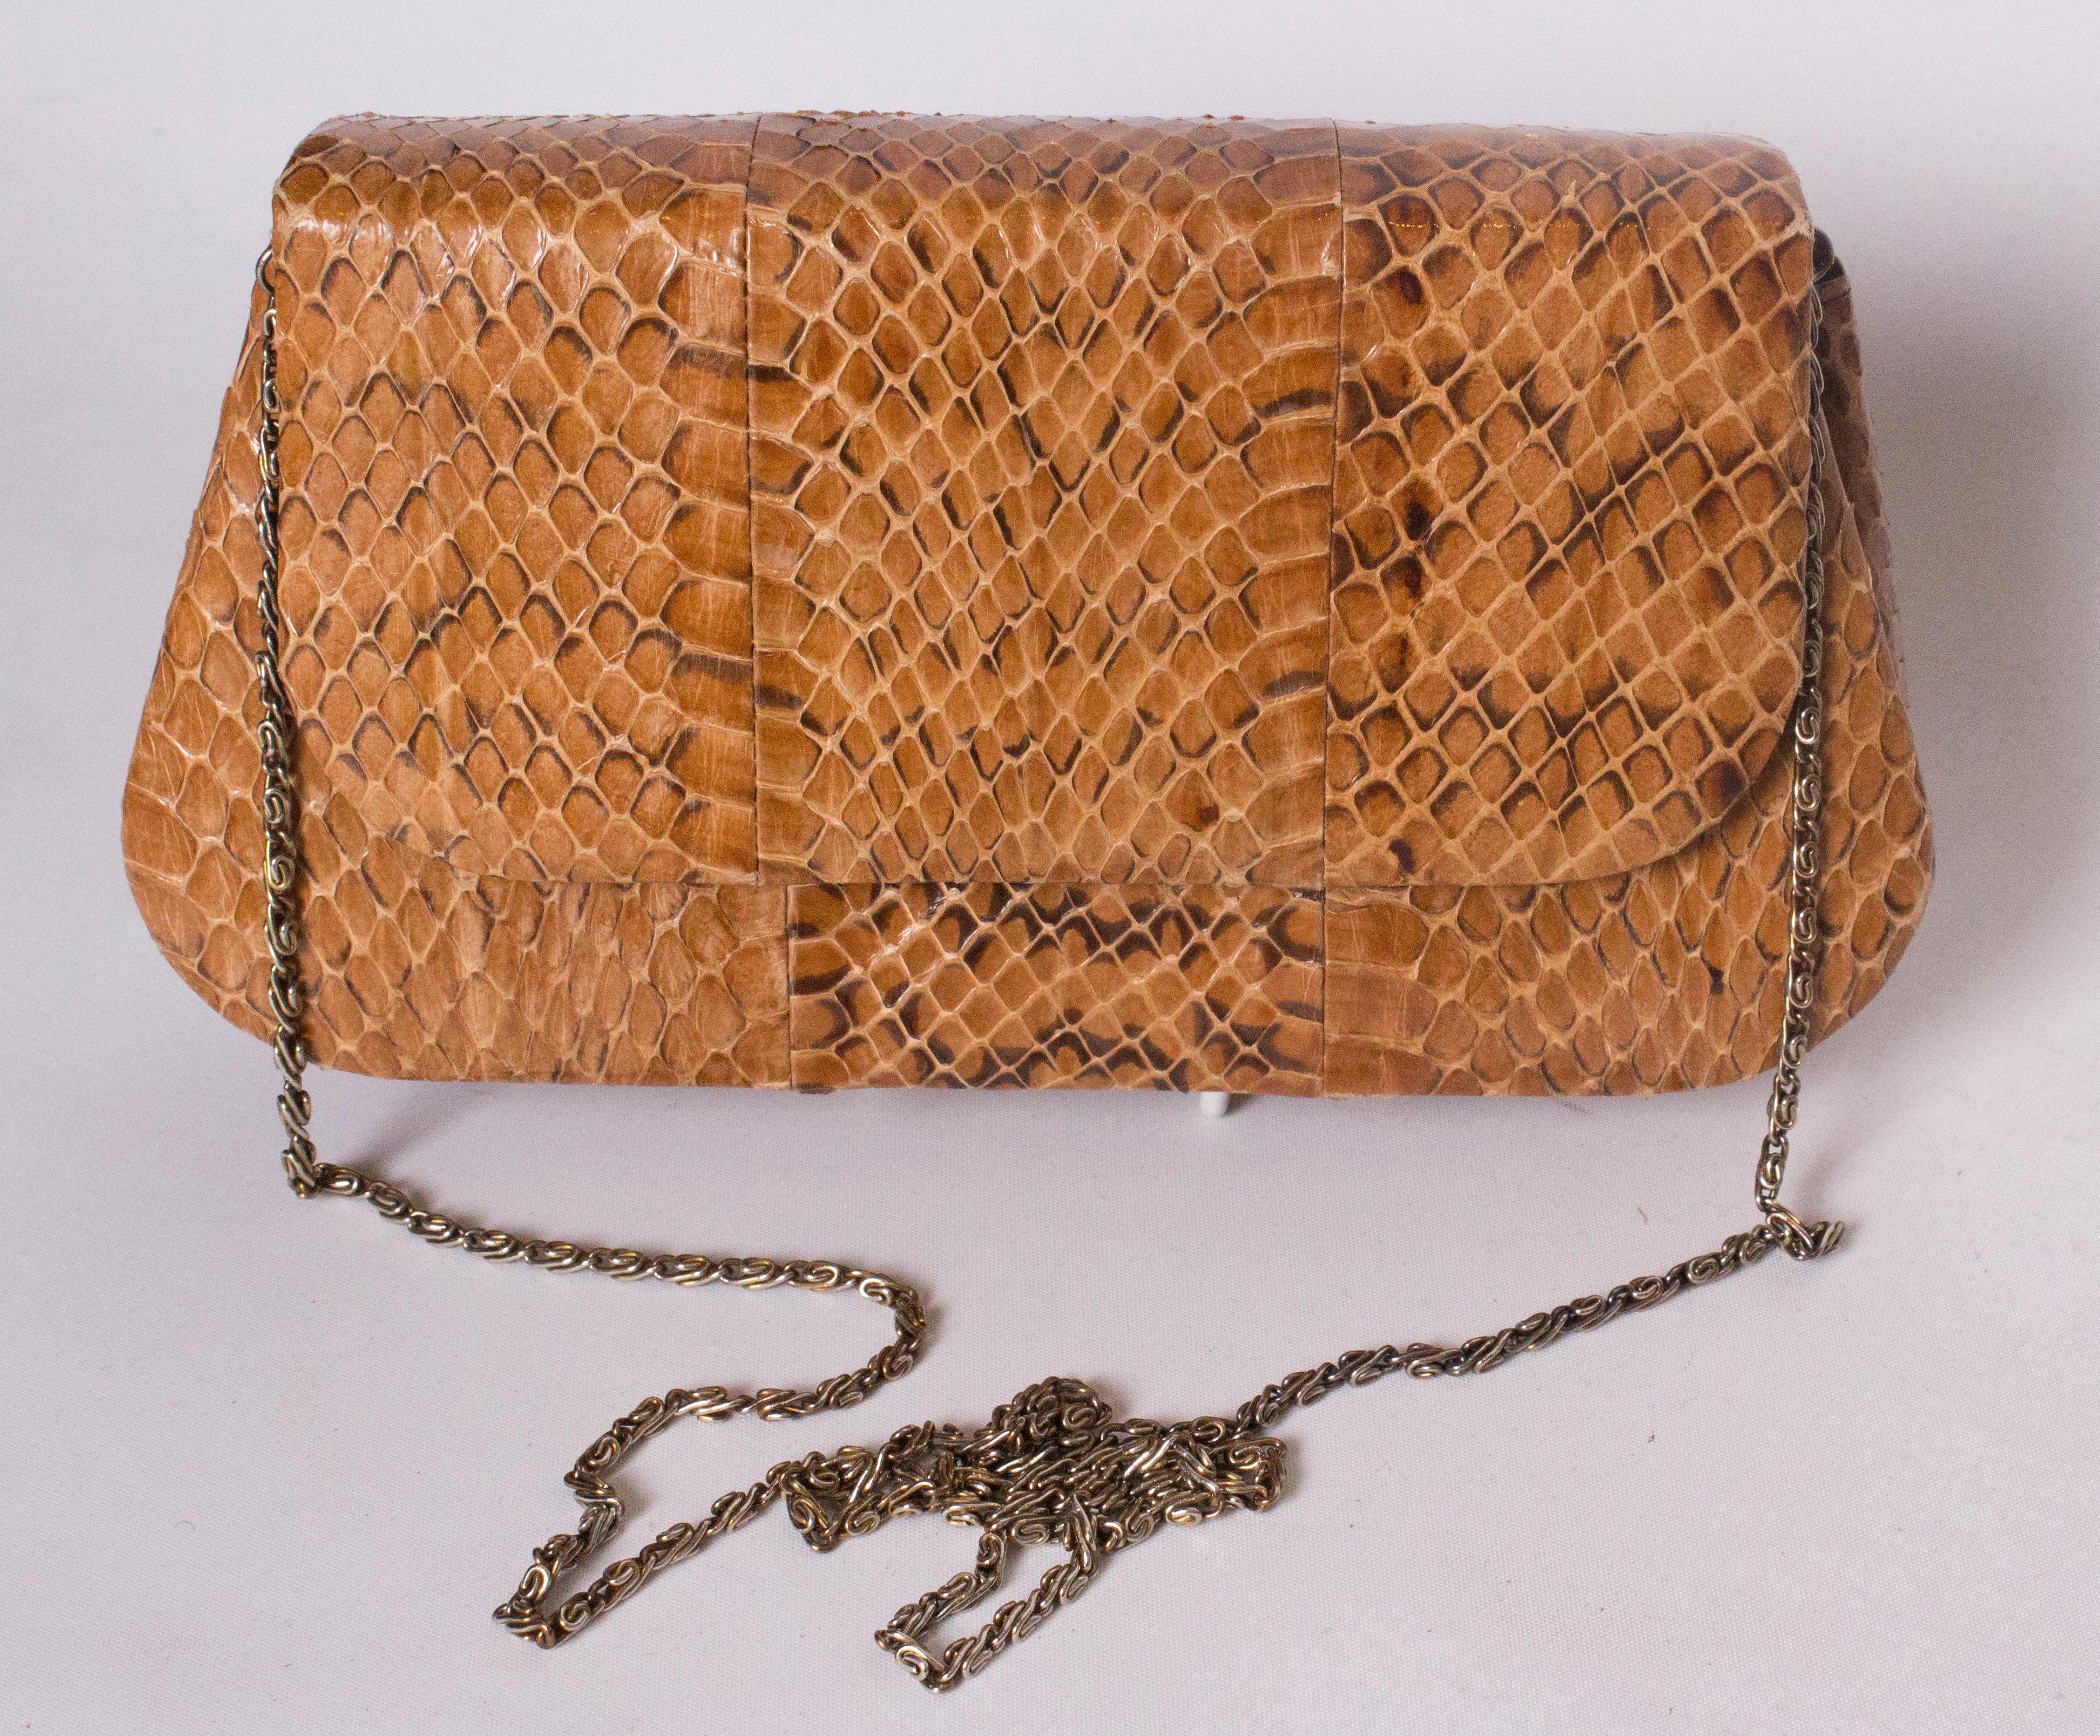 A chic snakeskin  bag in a nice mid brown colour. The bag has an internal chain and so can be used as a handbag, and a clutch bag. It has a fold over flap and one internal pouch pocket.